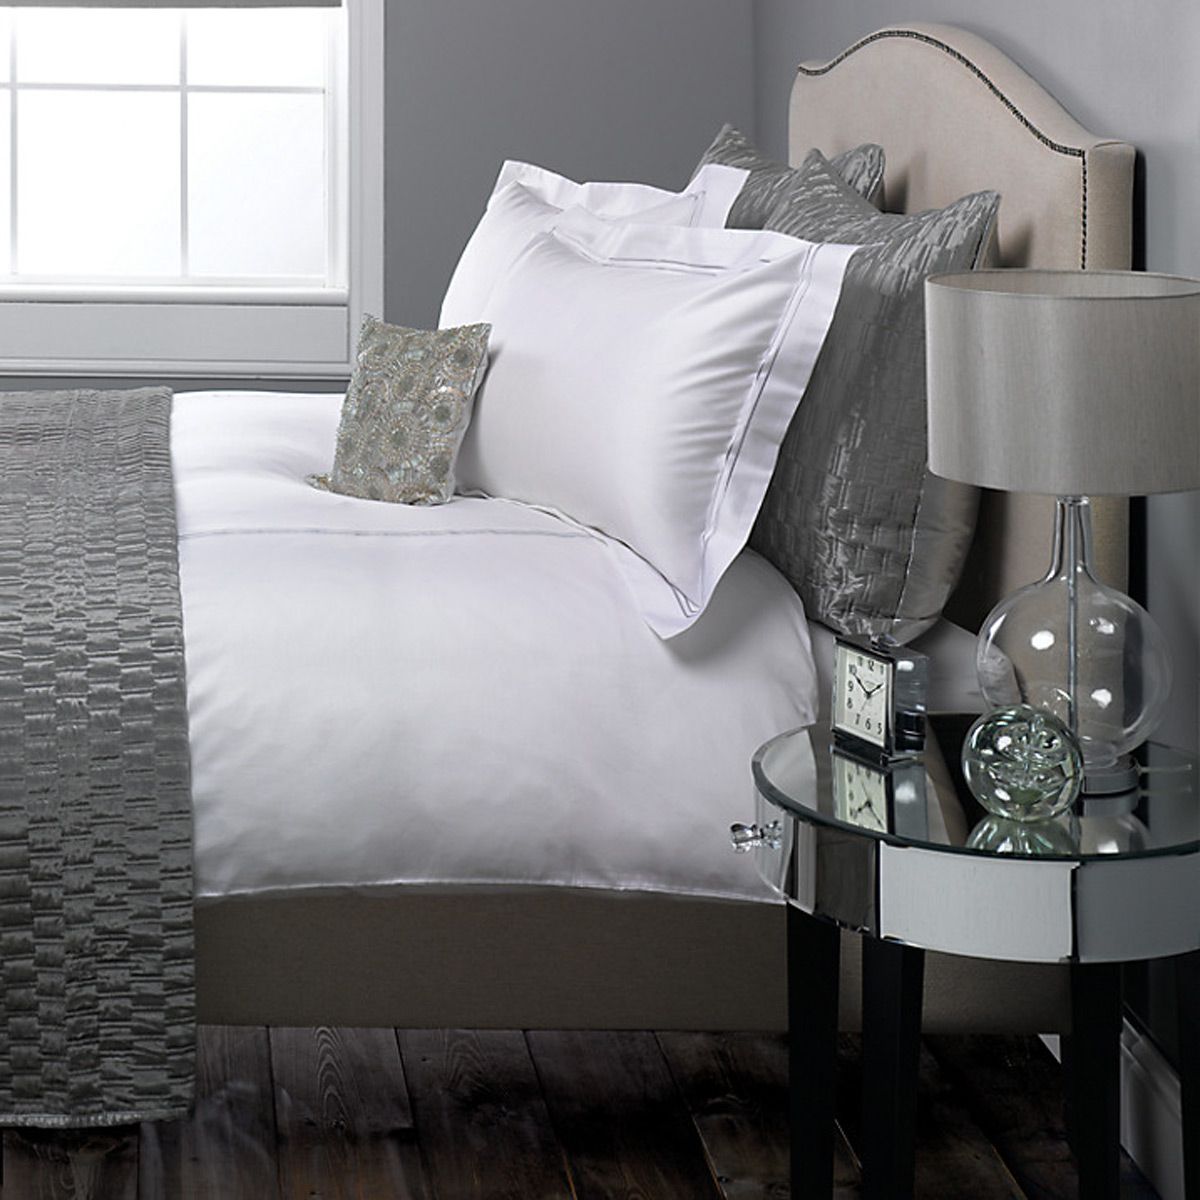 Embrace Sleeptember With Luxurious New Bedlinen Home Accessories